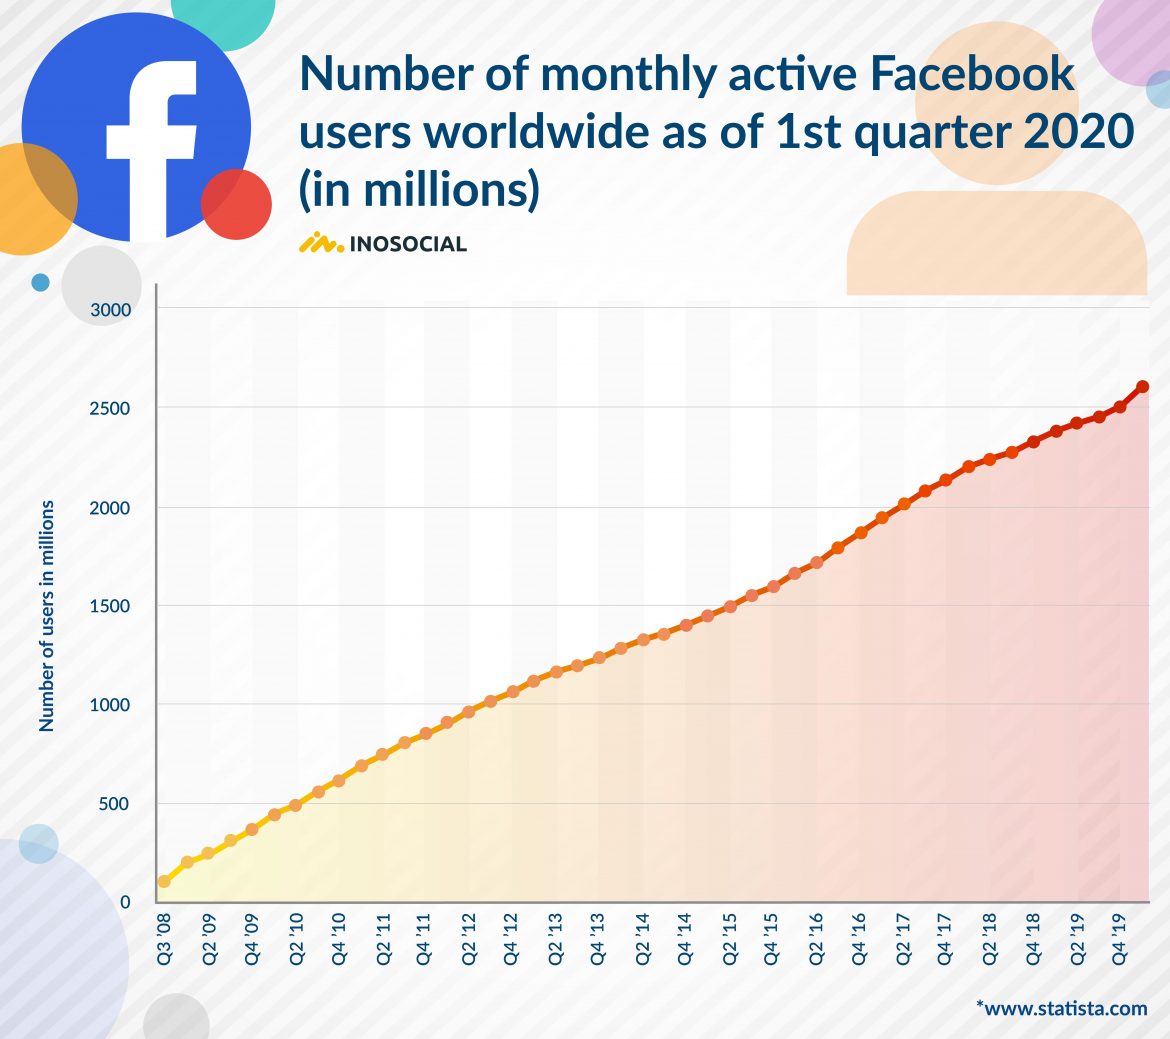 How many active users are on Facebook? InoSocial